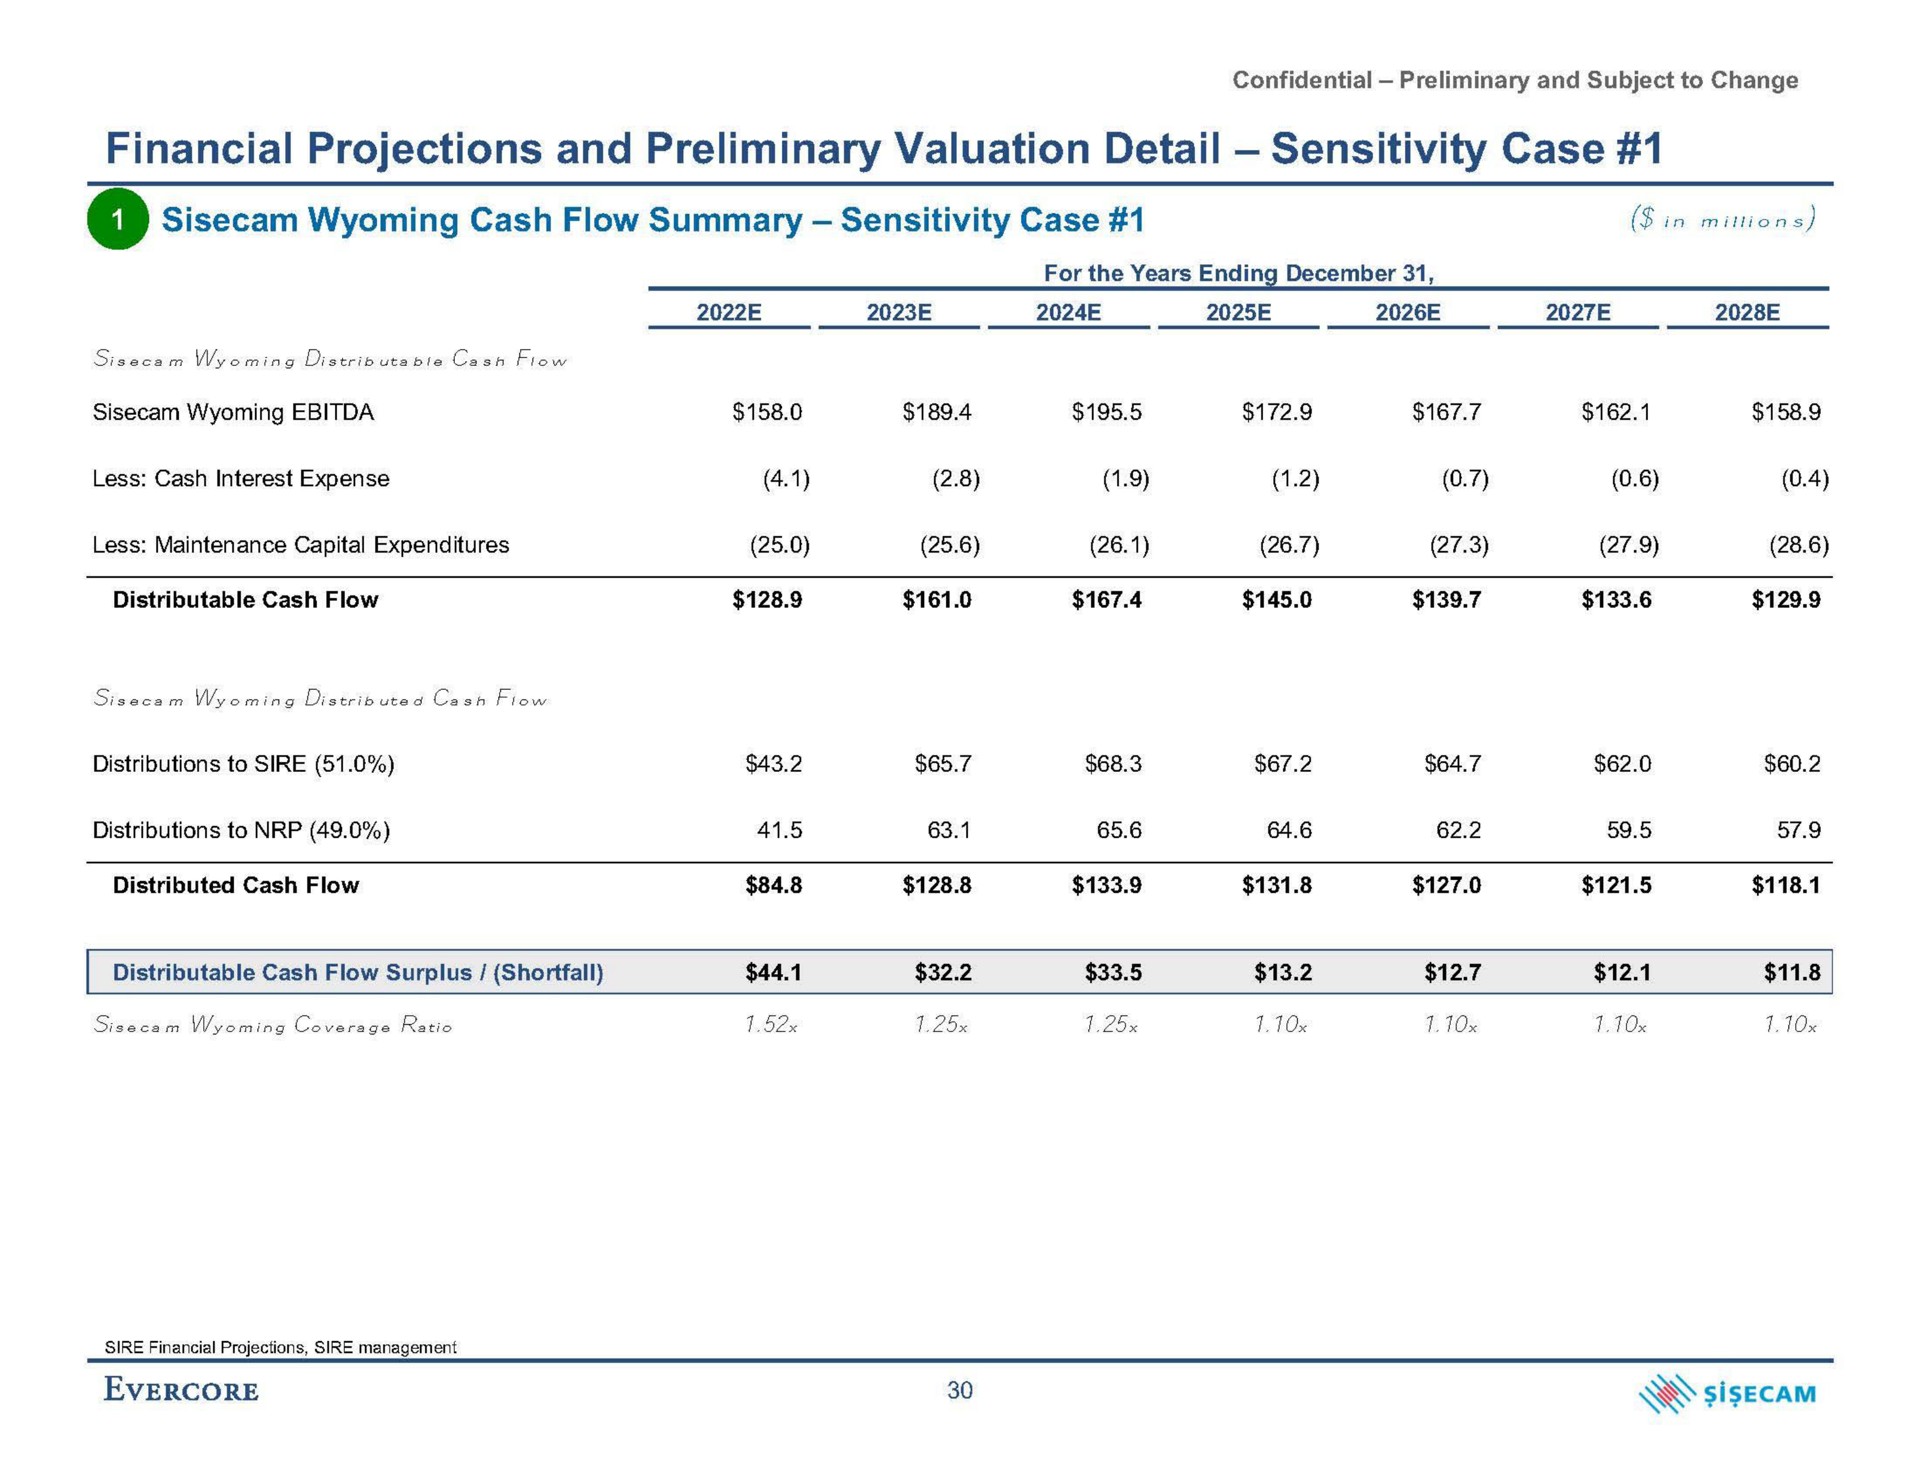 financial projections and preliminary valuation detail sensitivity case a cash flow summary sensitivity case in minions | Evercore